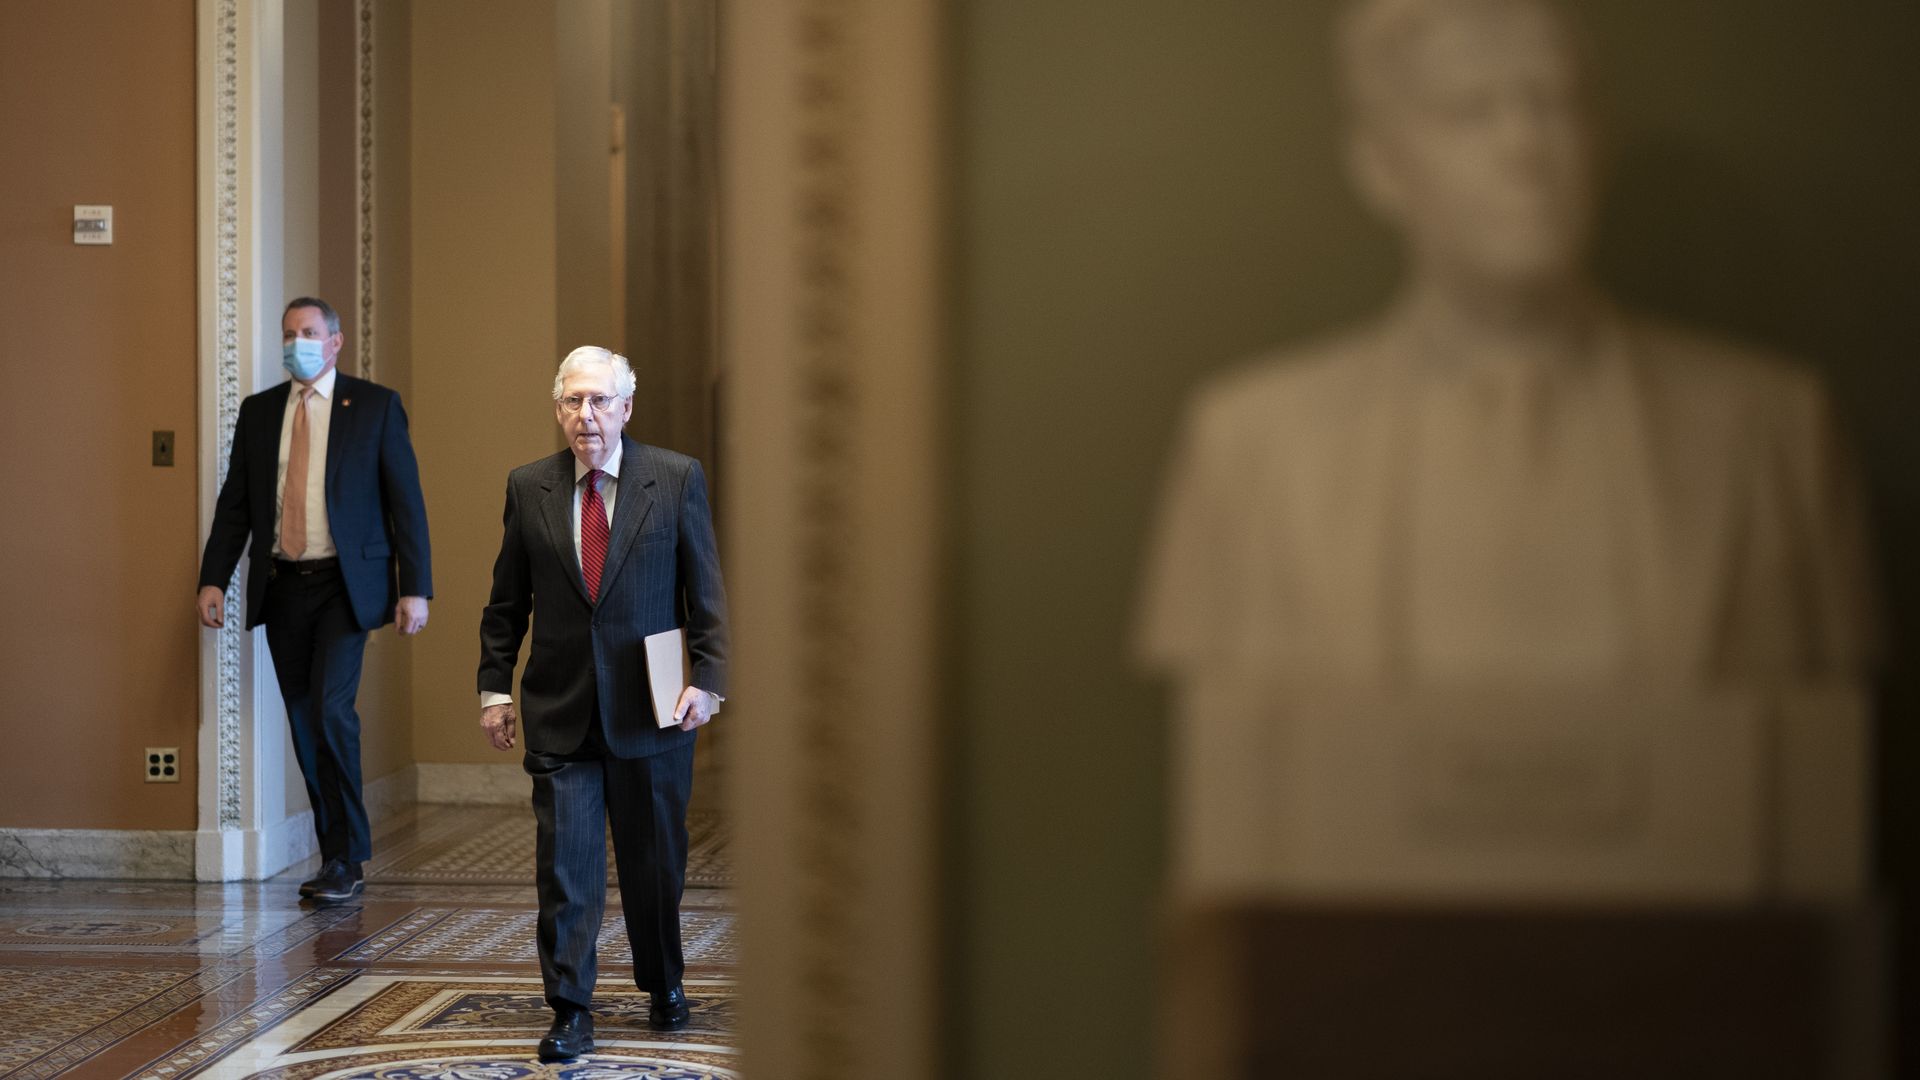 Senate Minority Leader Mitch McConnell is seen walking to the Senate Chamber on Thursday.